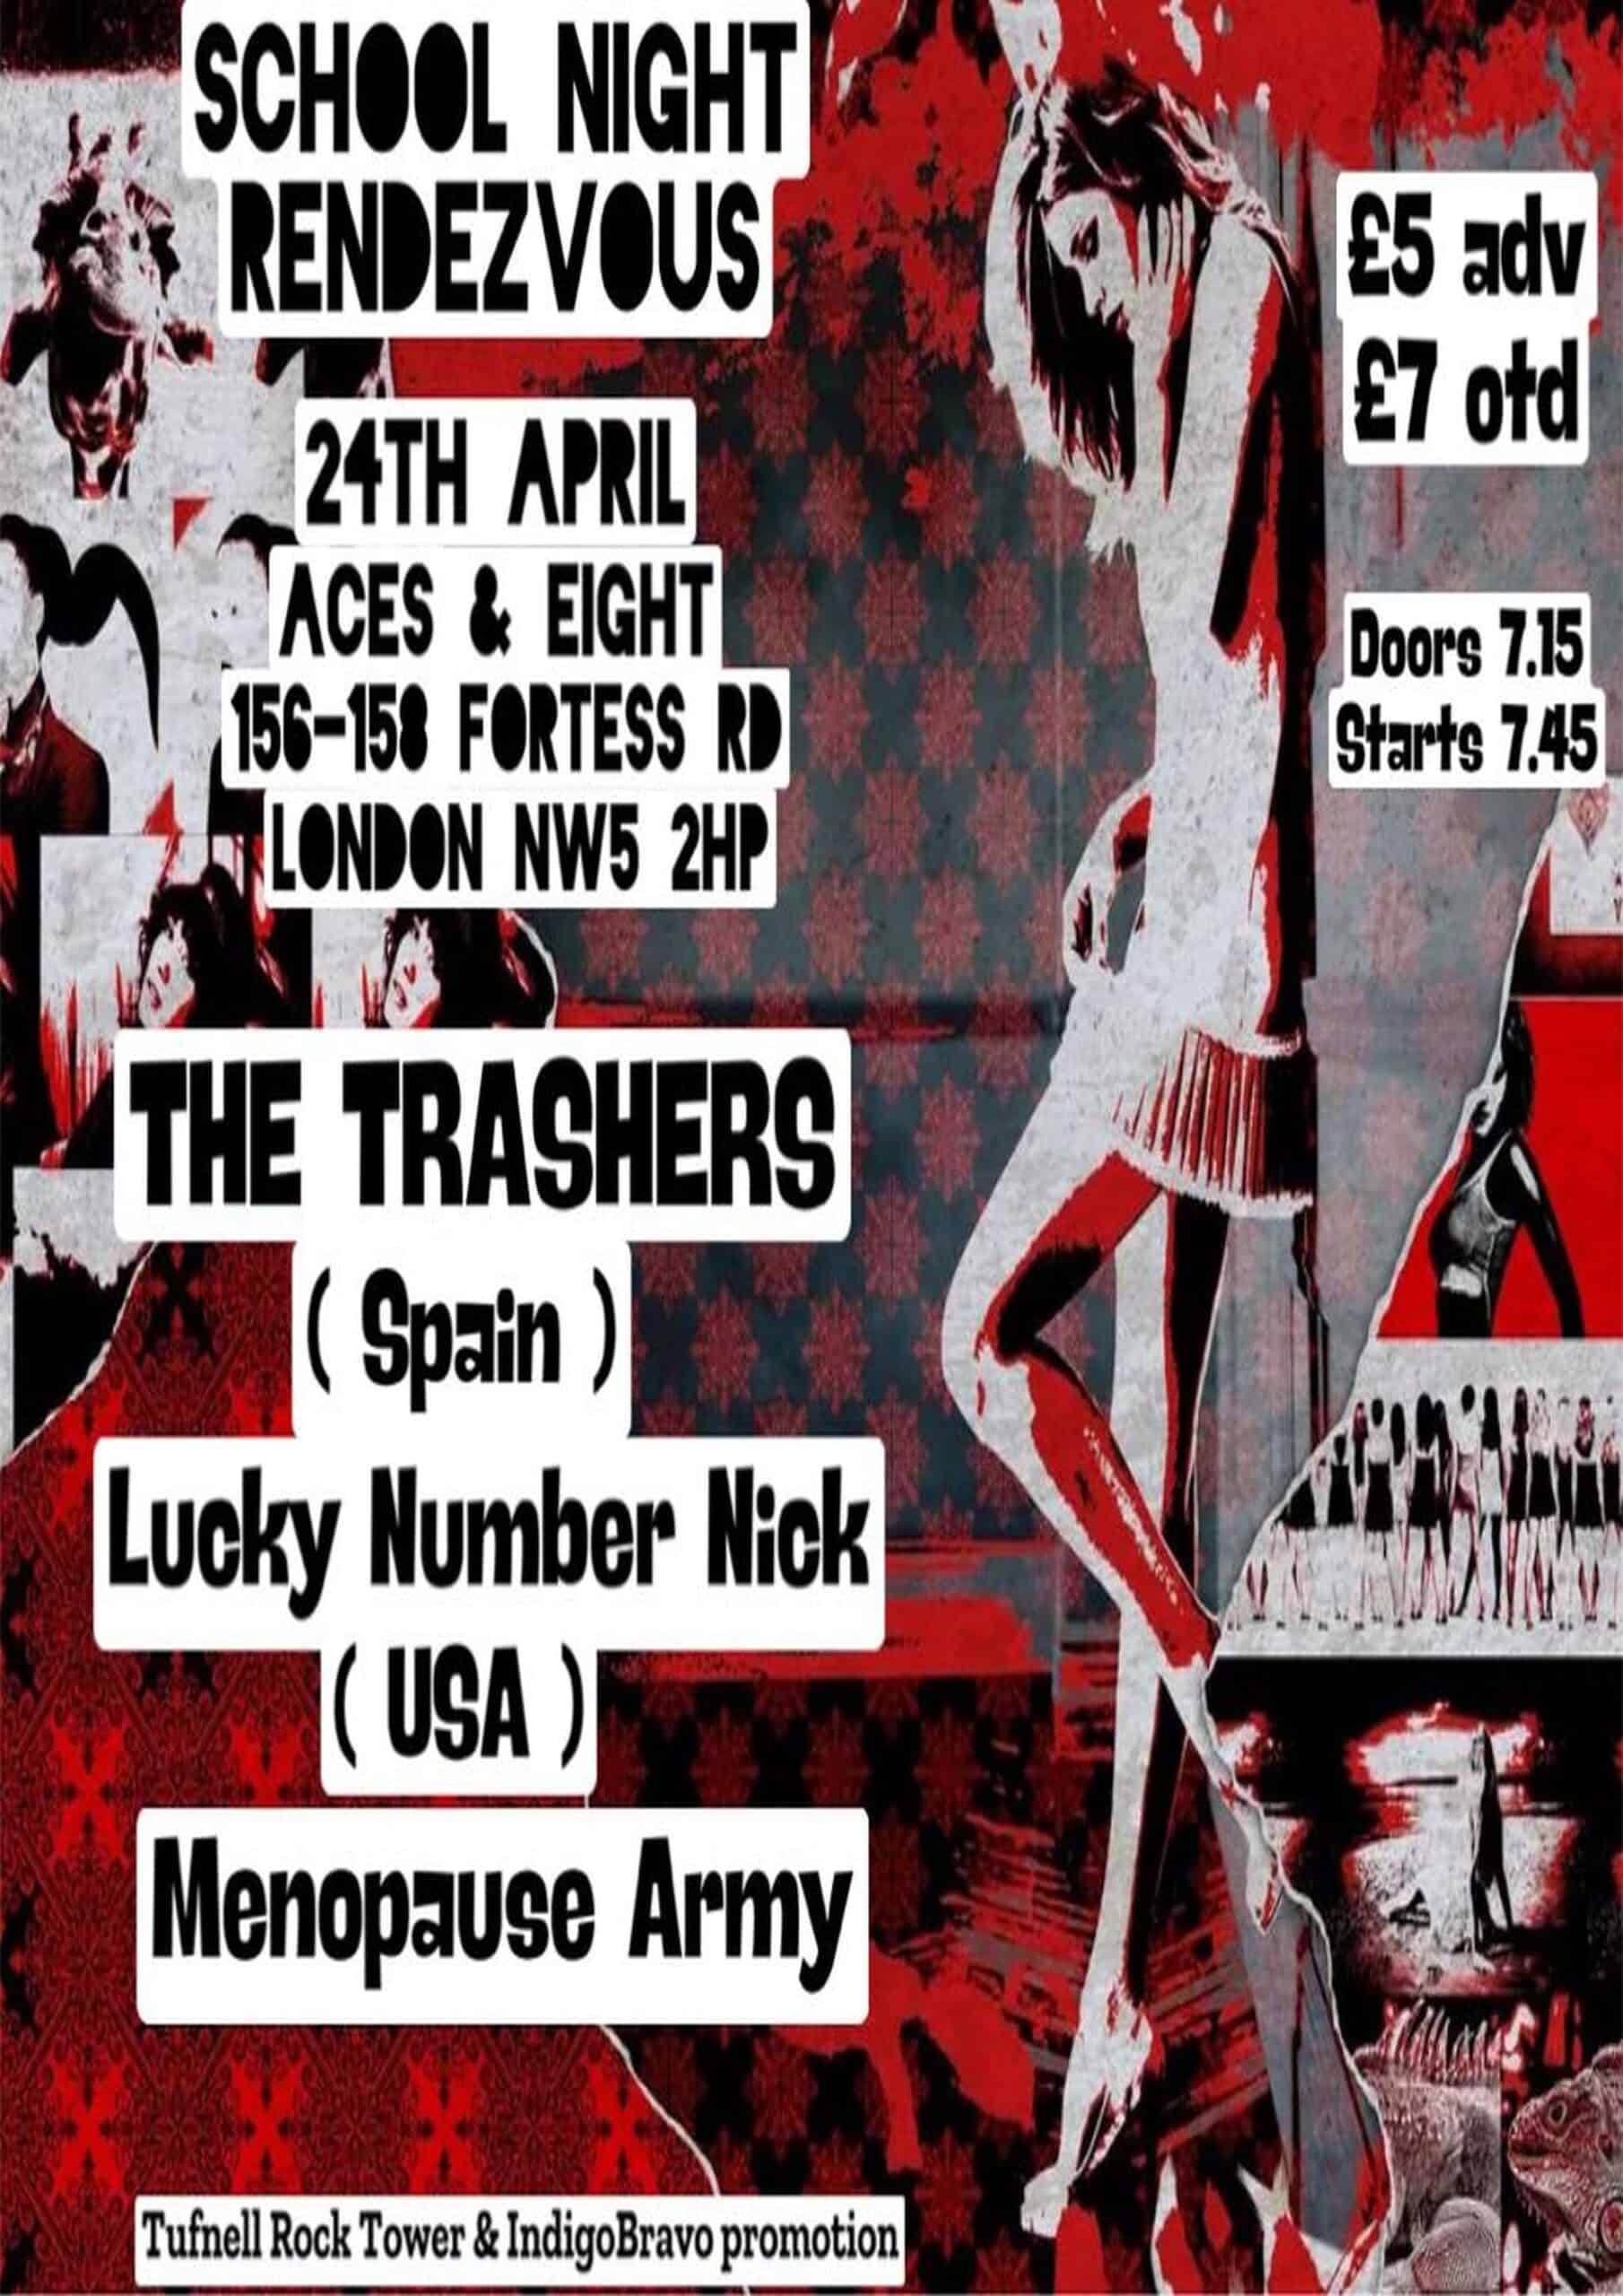 School Night Rendezvous Present The Trashers ( Spain ) + Lucky Number Nick (USA) + Menopause Army